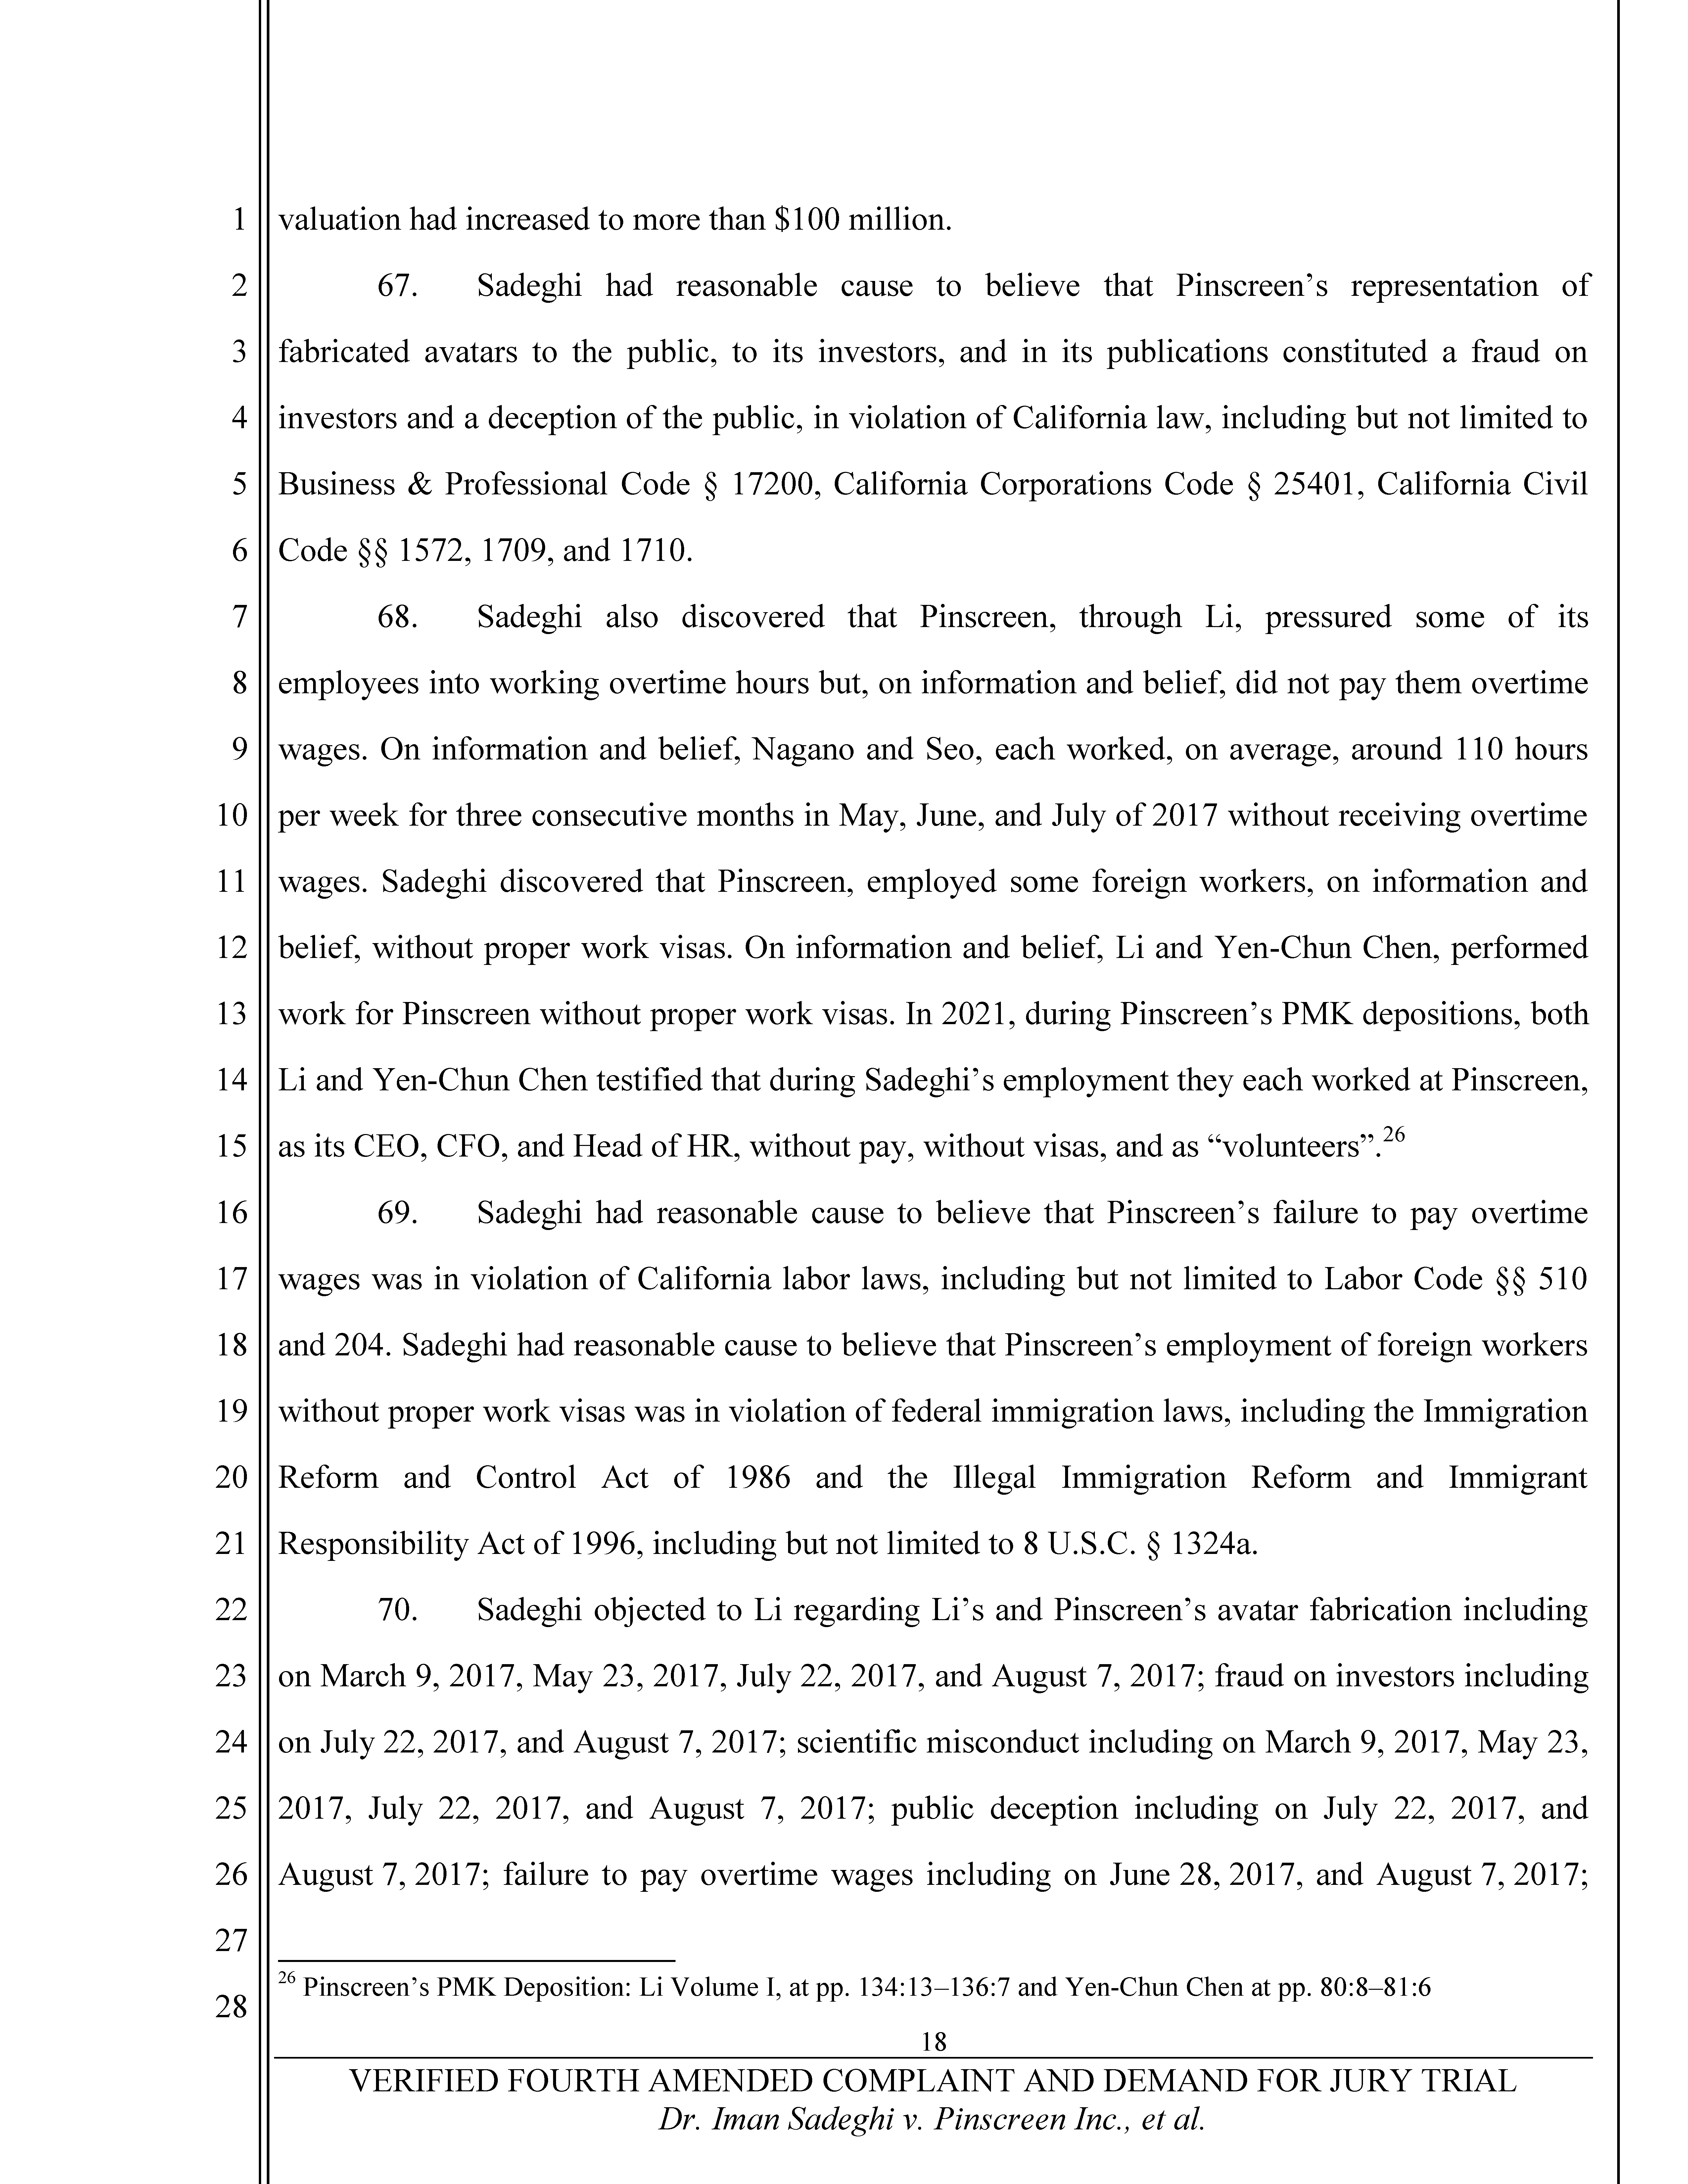 Fourth Amended Complaint (4AC) Page 19